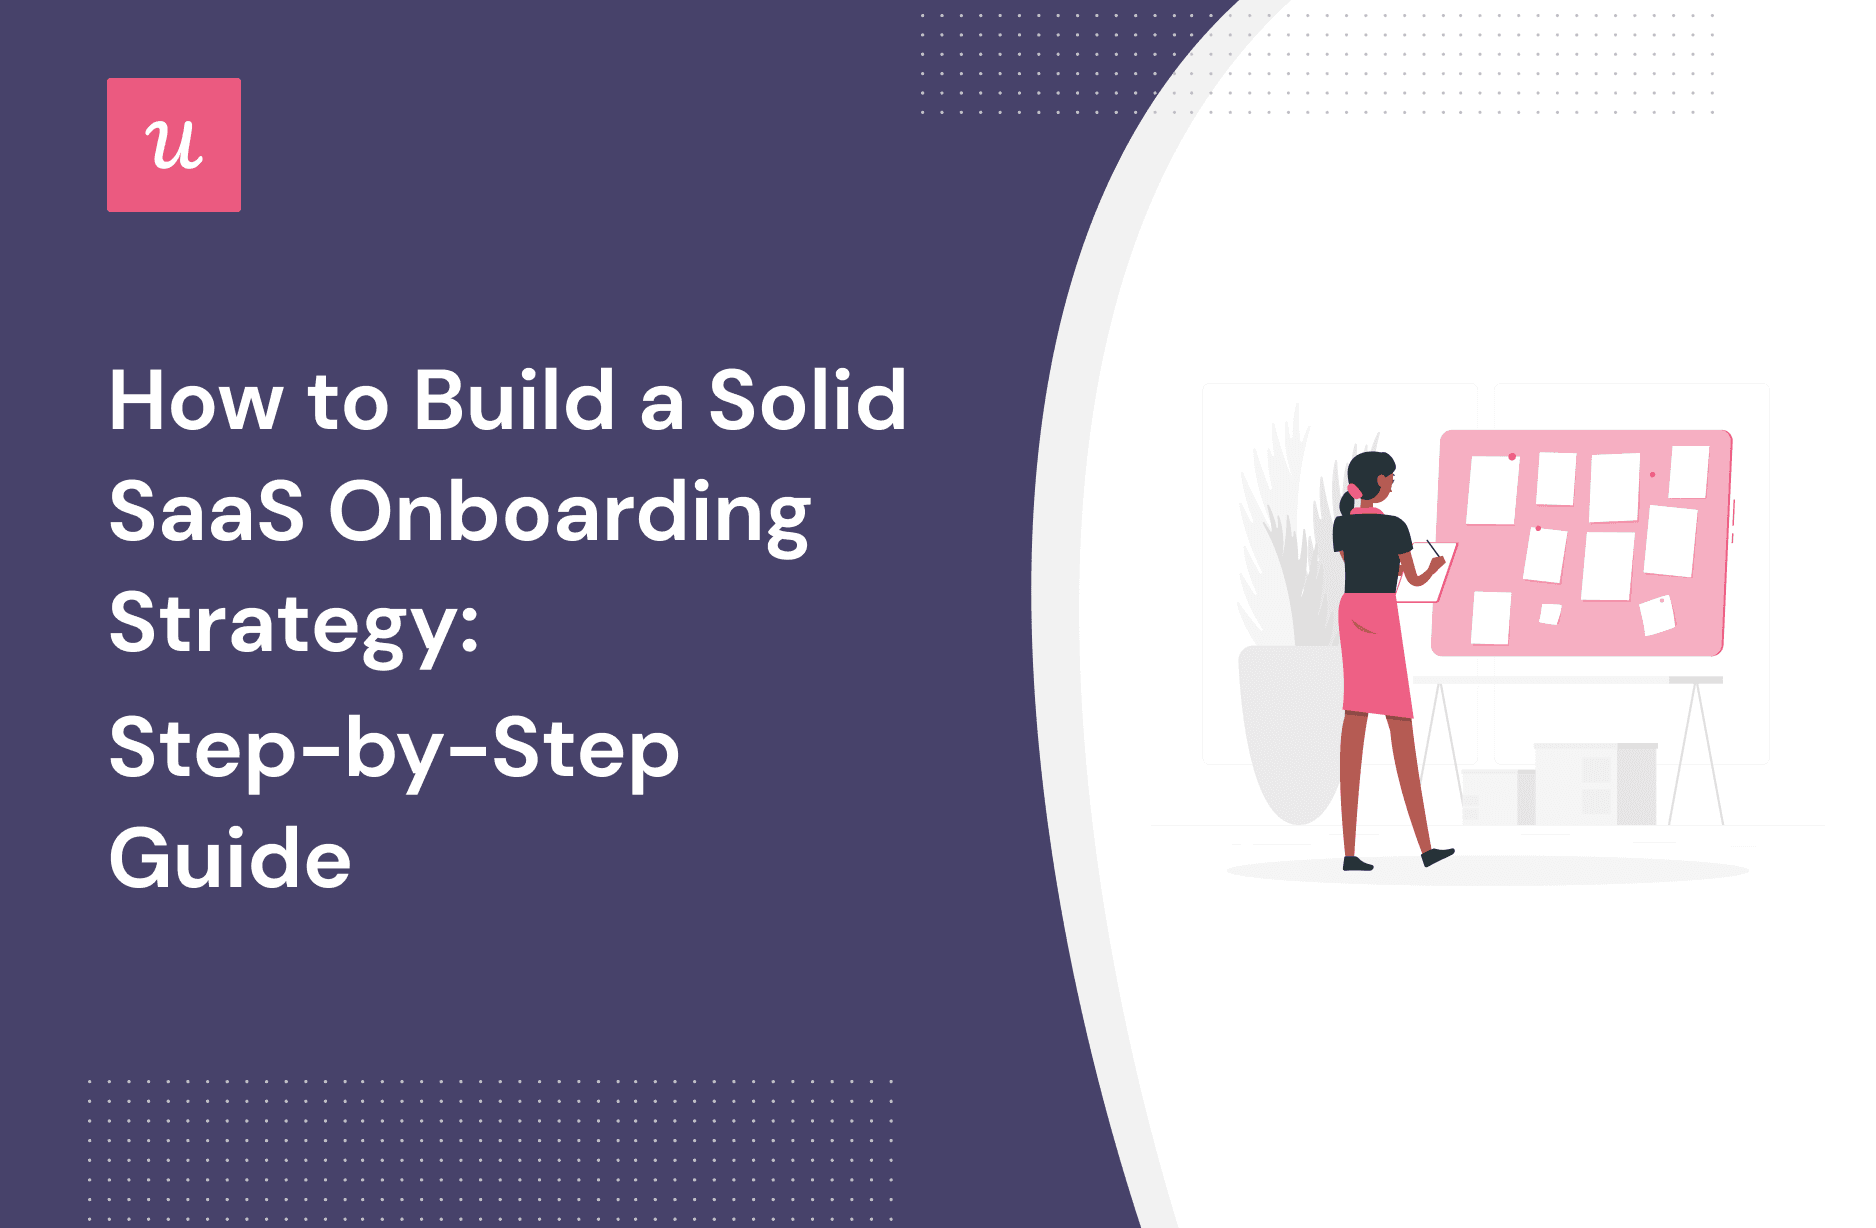 How to Build a Solid SaaS Onboarding Strategy: Step-by-Step Guide cover